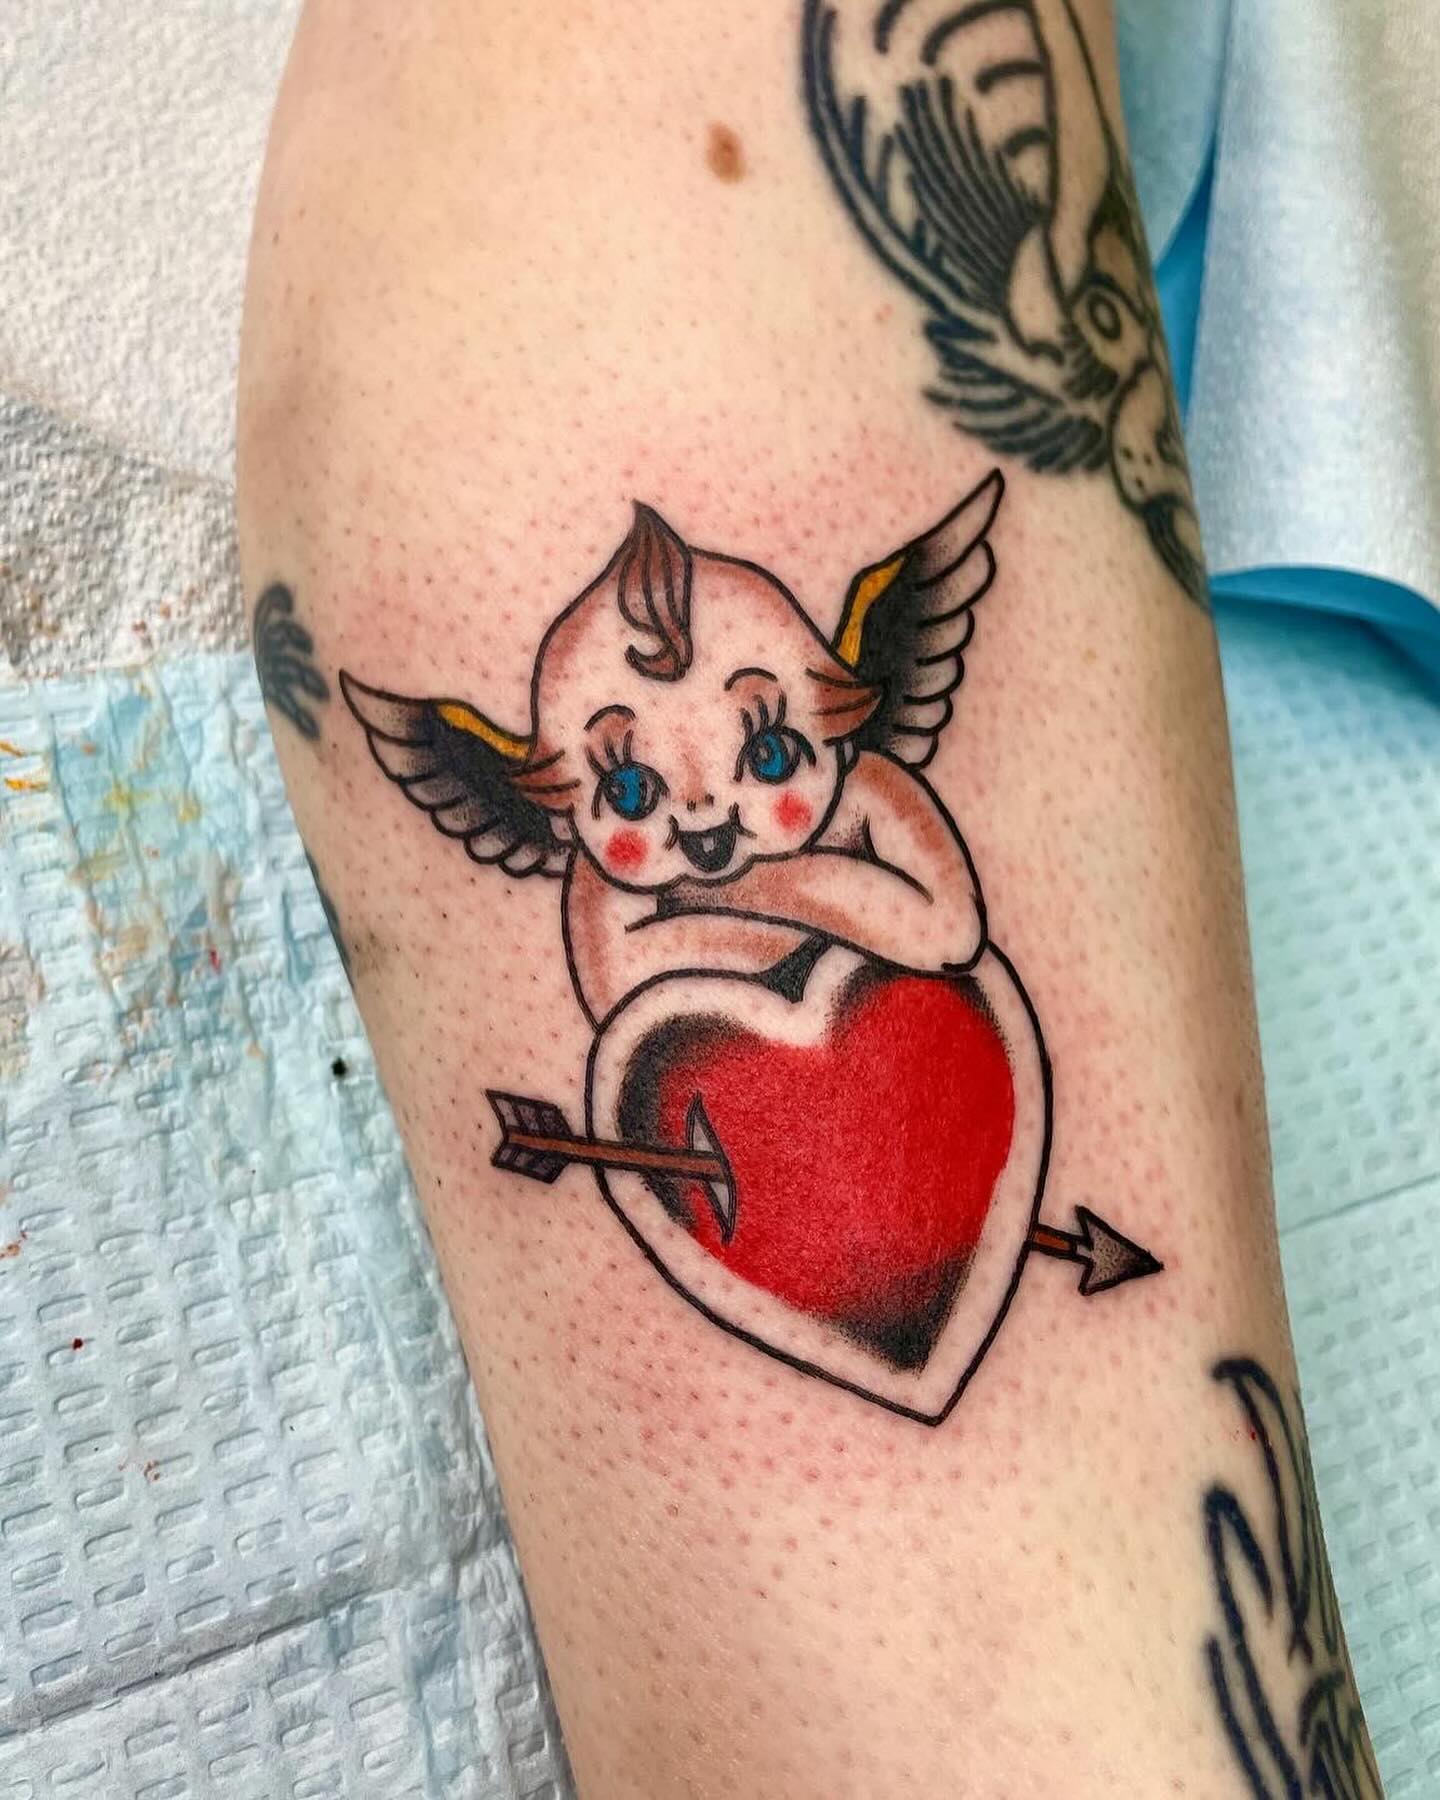 May 17th & 18th I’ll be guest spotting at @electric_love_tattoo in Pontiac, MI. DM me to setup an appointment. Anything from my “LOL up 4 grabs” highlight will be $100-200, color or black & gray. If you’re looking for something else, send me a reference and I’ll make it happen. See you soon Michigan! 
.
.
.
#tattoo #bodyart #tattooedgirls #tattoodesign #tattooist #inkedup #tatuagem #tattooing #instatattoo #traditionaltattoo #tattooideas #tattoogirl #blackandgreytattoo #tatuaje #blackandgrey #tattooer #tattooink #blacktattoo #tattooflash #tattoostyle #tatuajes #lifesuxlol